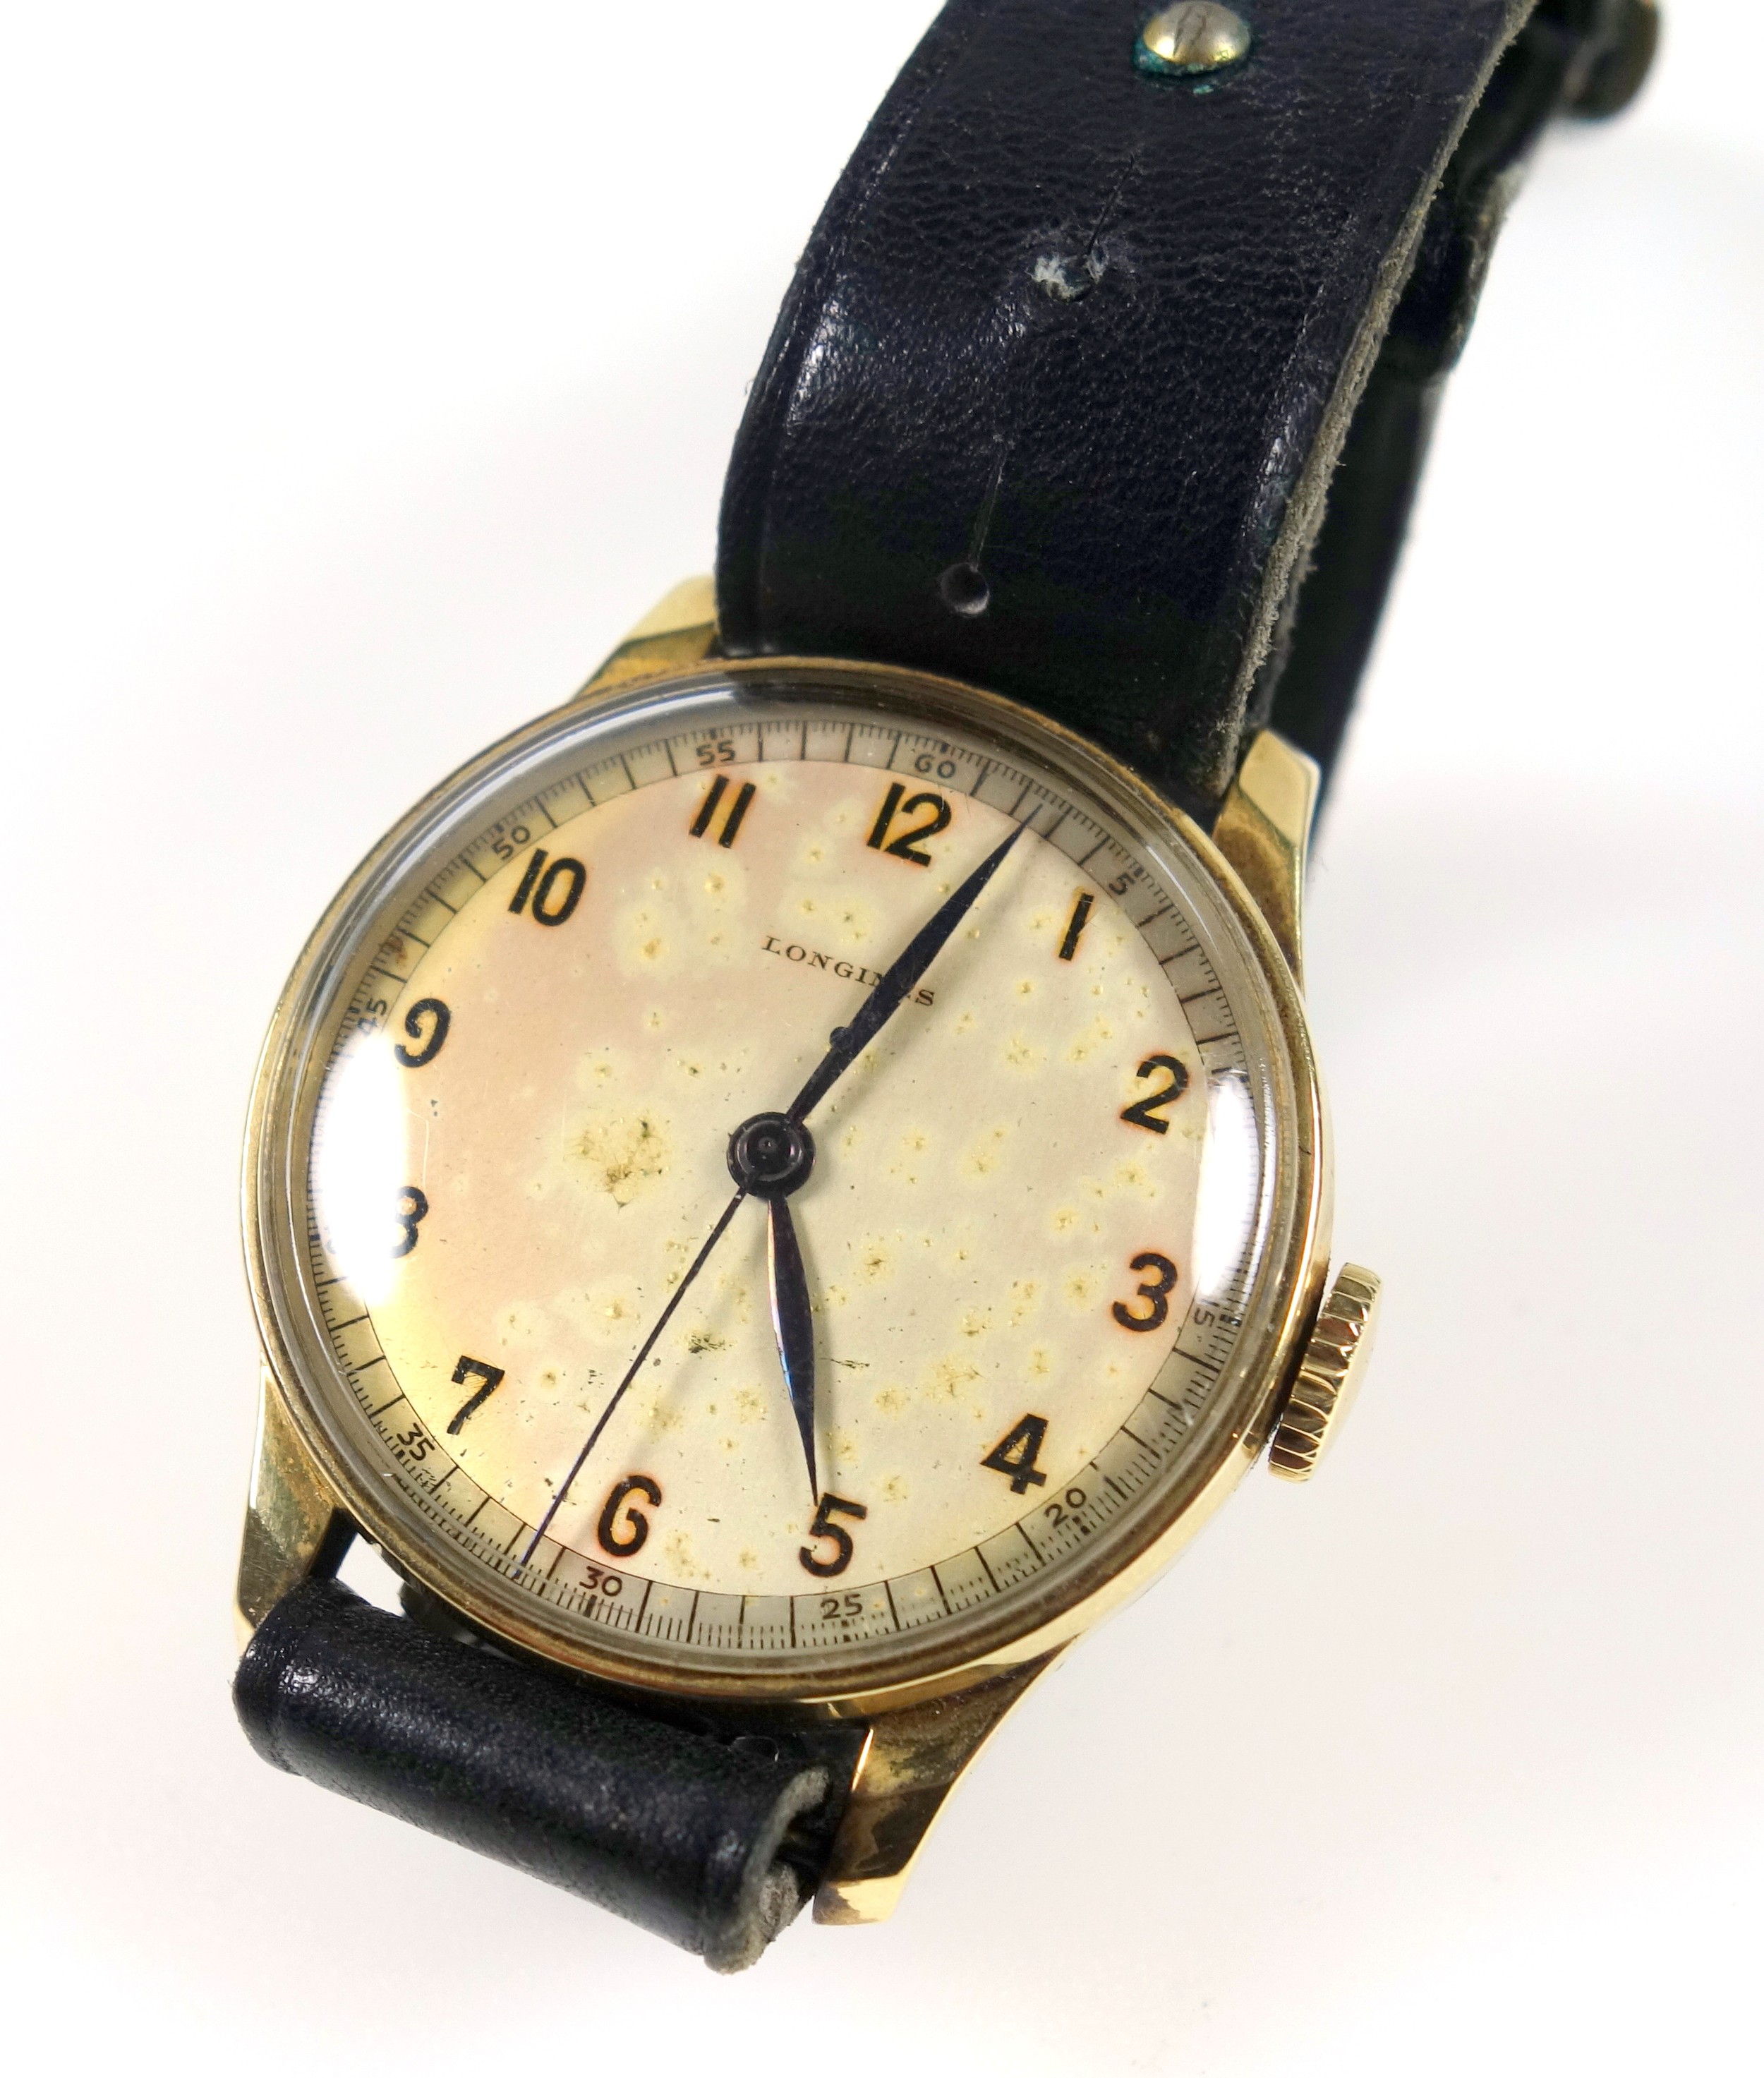 Longines yellow metal gentleman's wristwatch with an ivory coloured dial, black Arabic numerals - Image 4 of 5